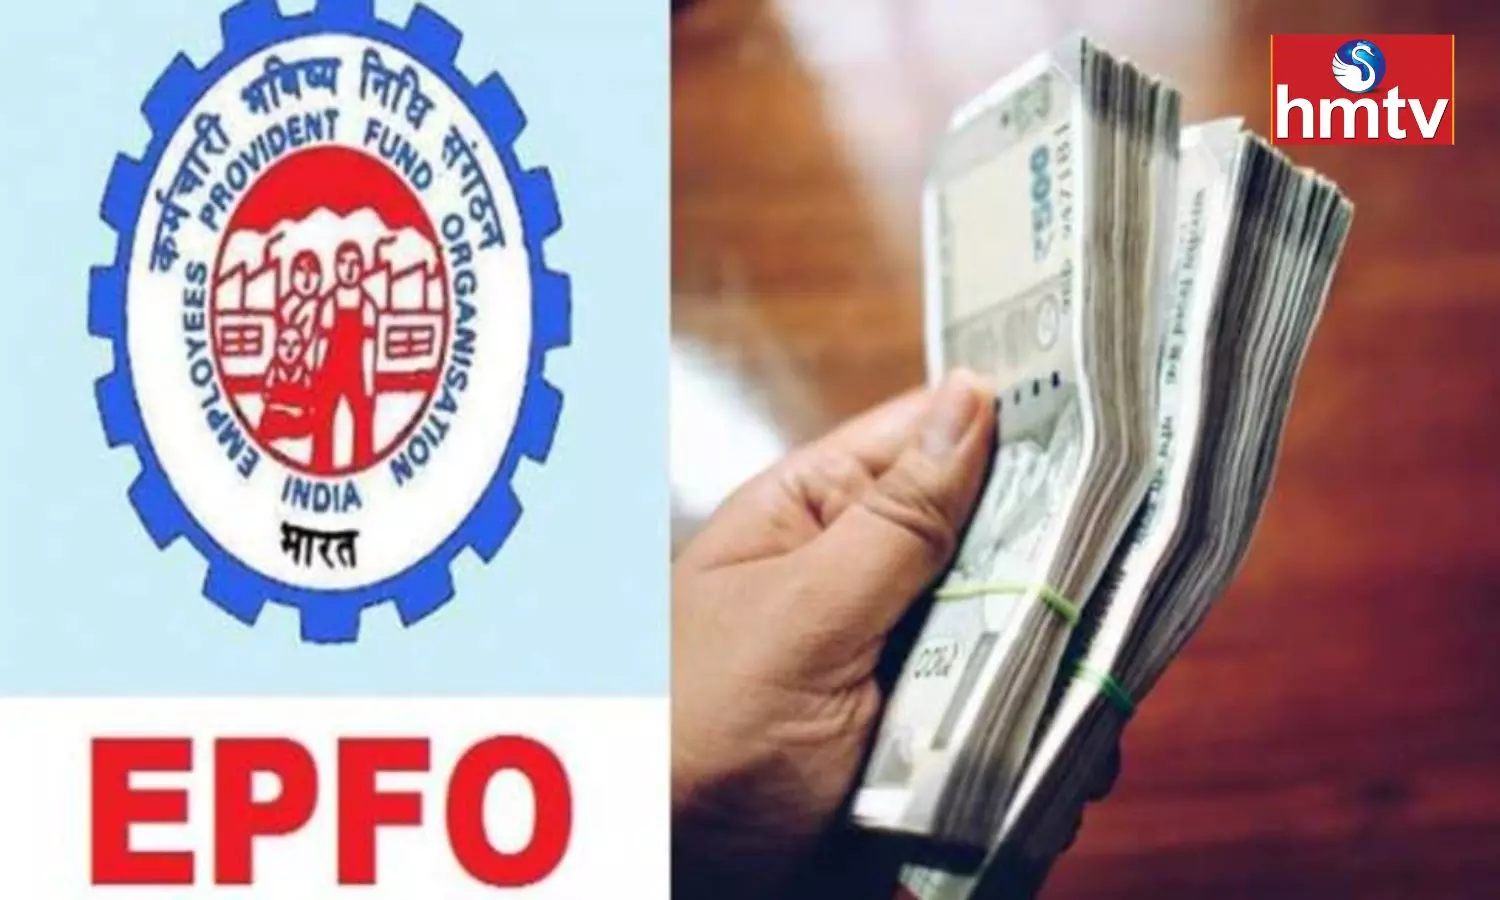 EPFO Good news double money can be withdrawn from PF account in case of emergency